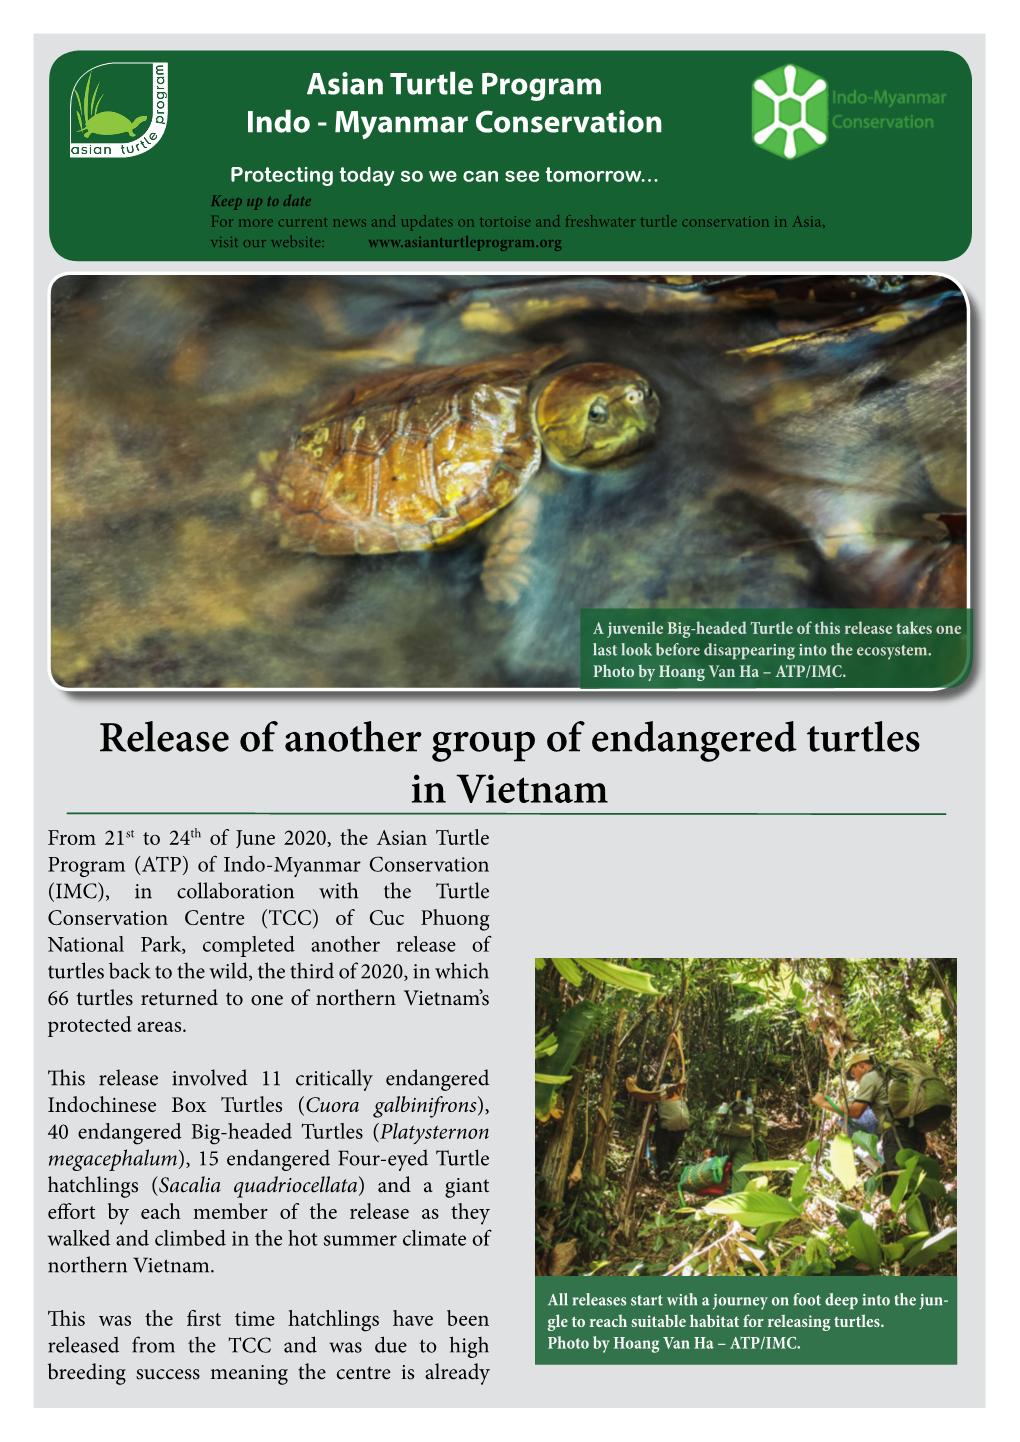 Release of Another Group of Endangered Turtles in Vietnam